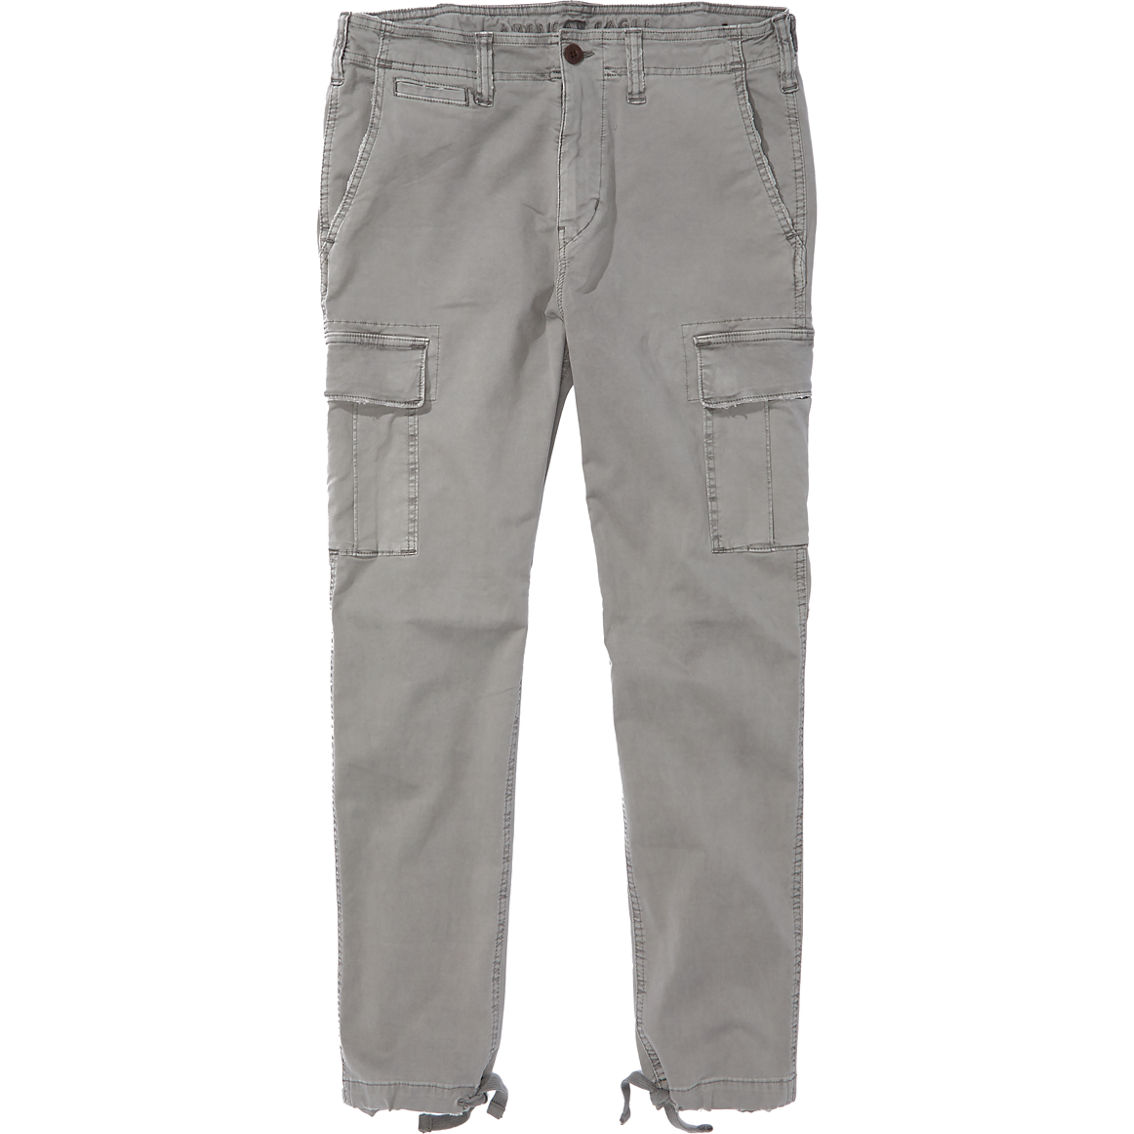 American Eagle Ae Flex Slim Lived-in Cargo Pants | Pants | Clothing ...